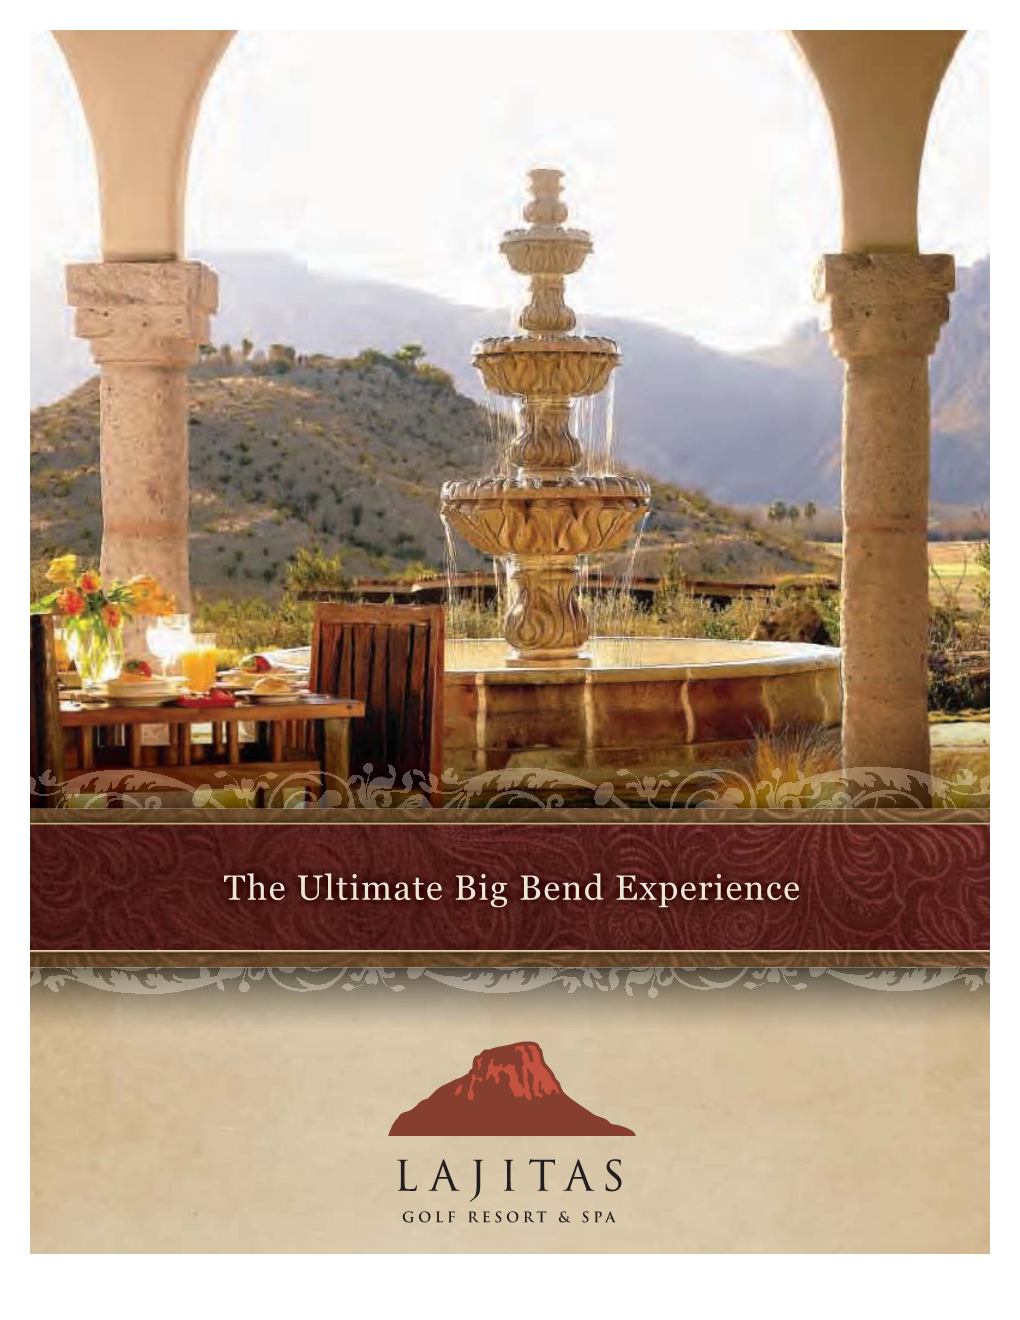 The Ultimate Big Bend Experience Lajitas Is Designed with the Corporate Retreat, Group Meeting, Incentive Trip Or Memorable Wedding in Mind